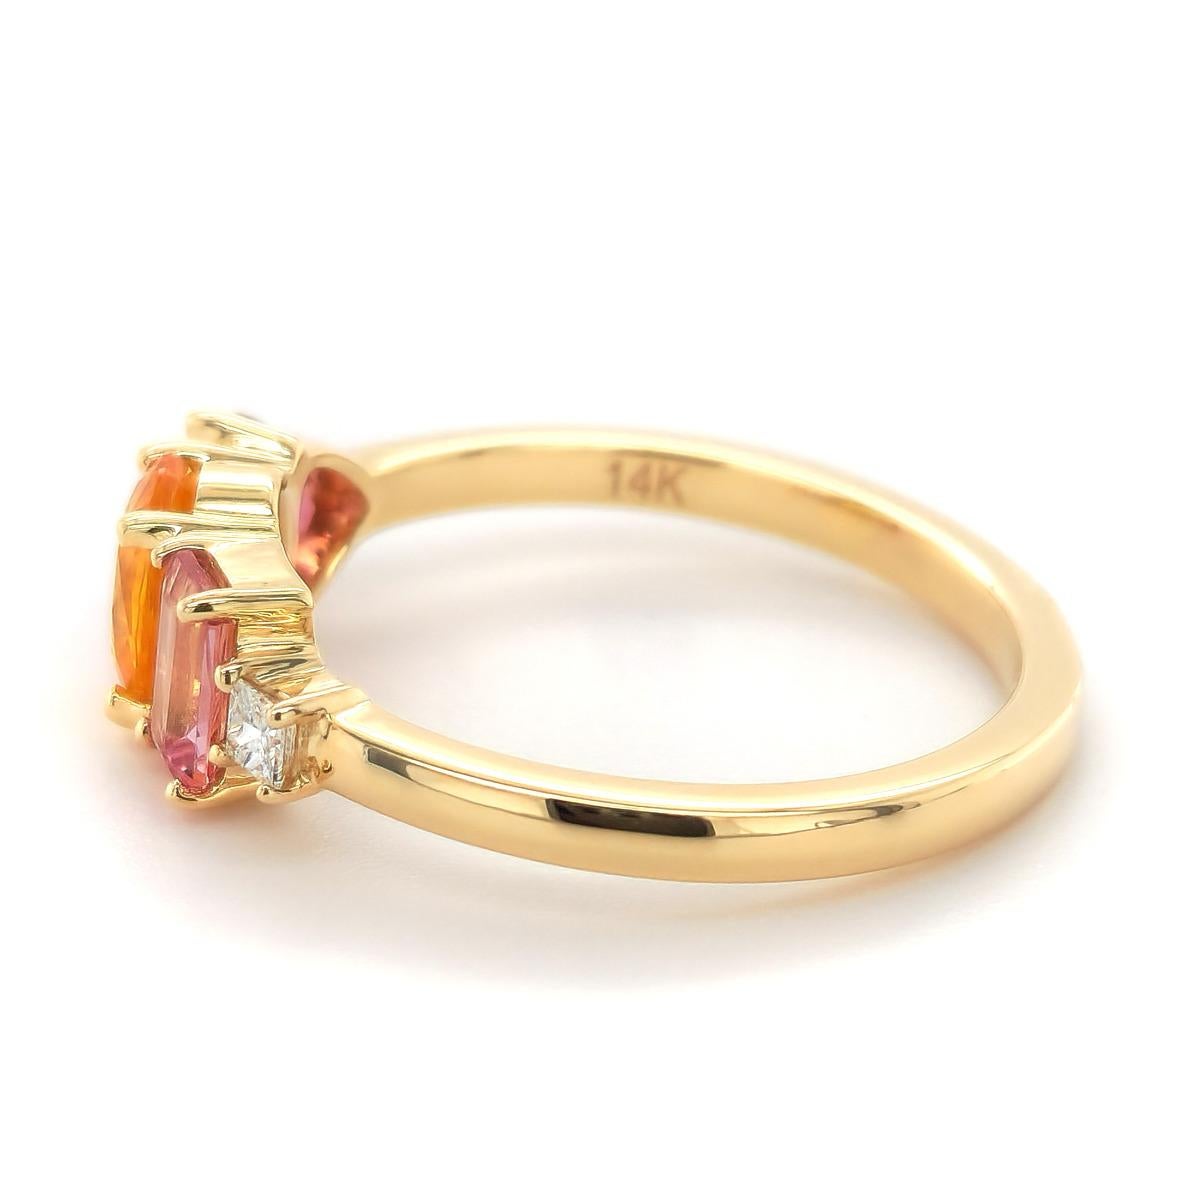 Yellow Sapphire 0.76 carats

Pink Tourmaline 0.35 carats

Imperial Topaz 0.29 carats

Diamond 0.04 carats

Ring Overview
SKU
4548
Center Stone
Yellow Sapphire
Side Stones
Diamonds
Metal Type
14K Yellow Gold
Metal Weight
2.36 gr
Size
6.5

Center